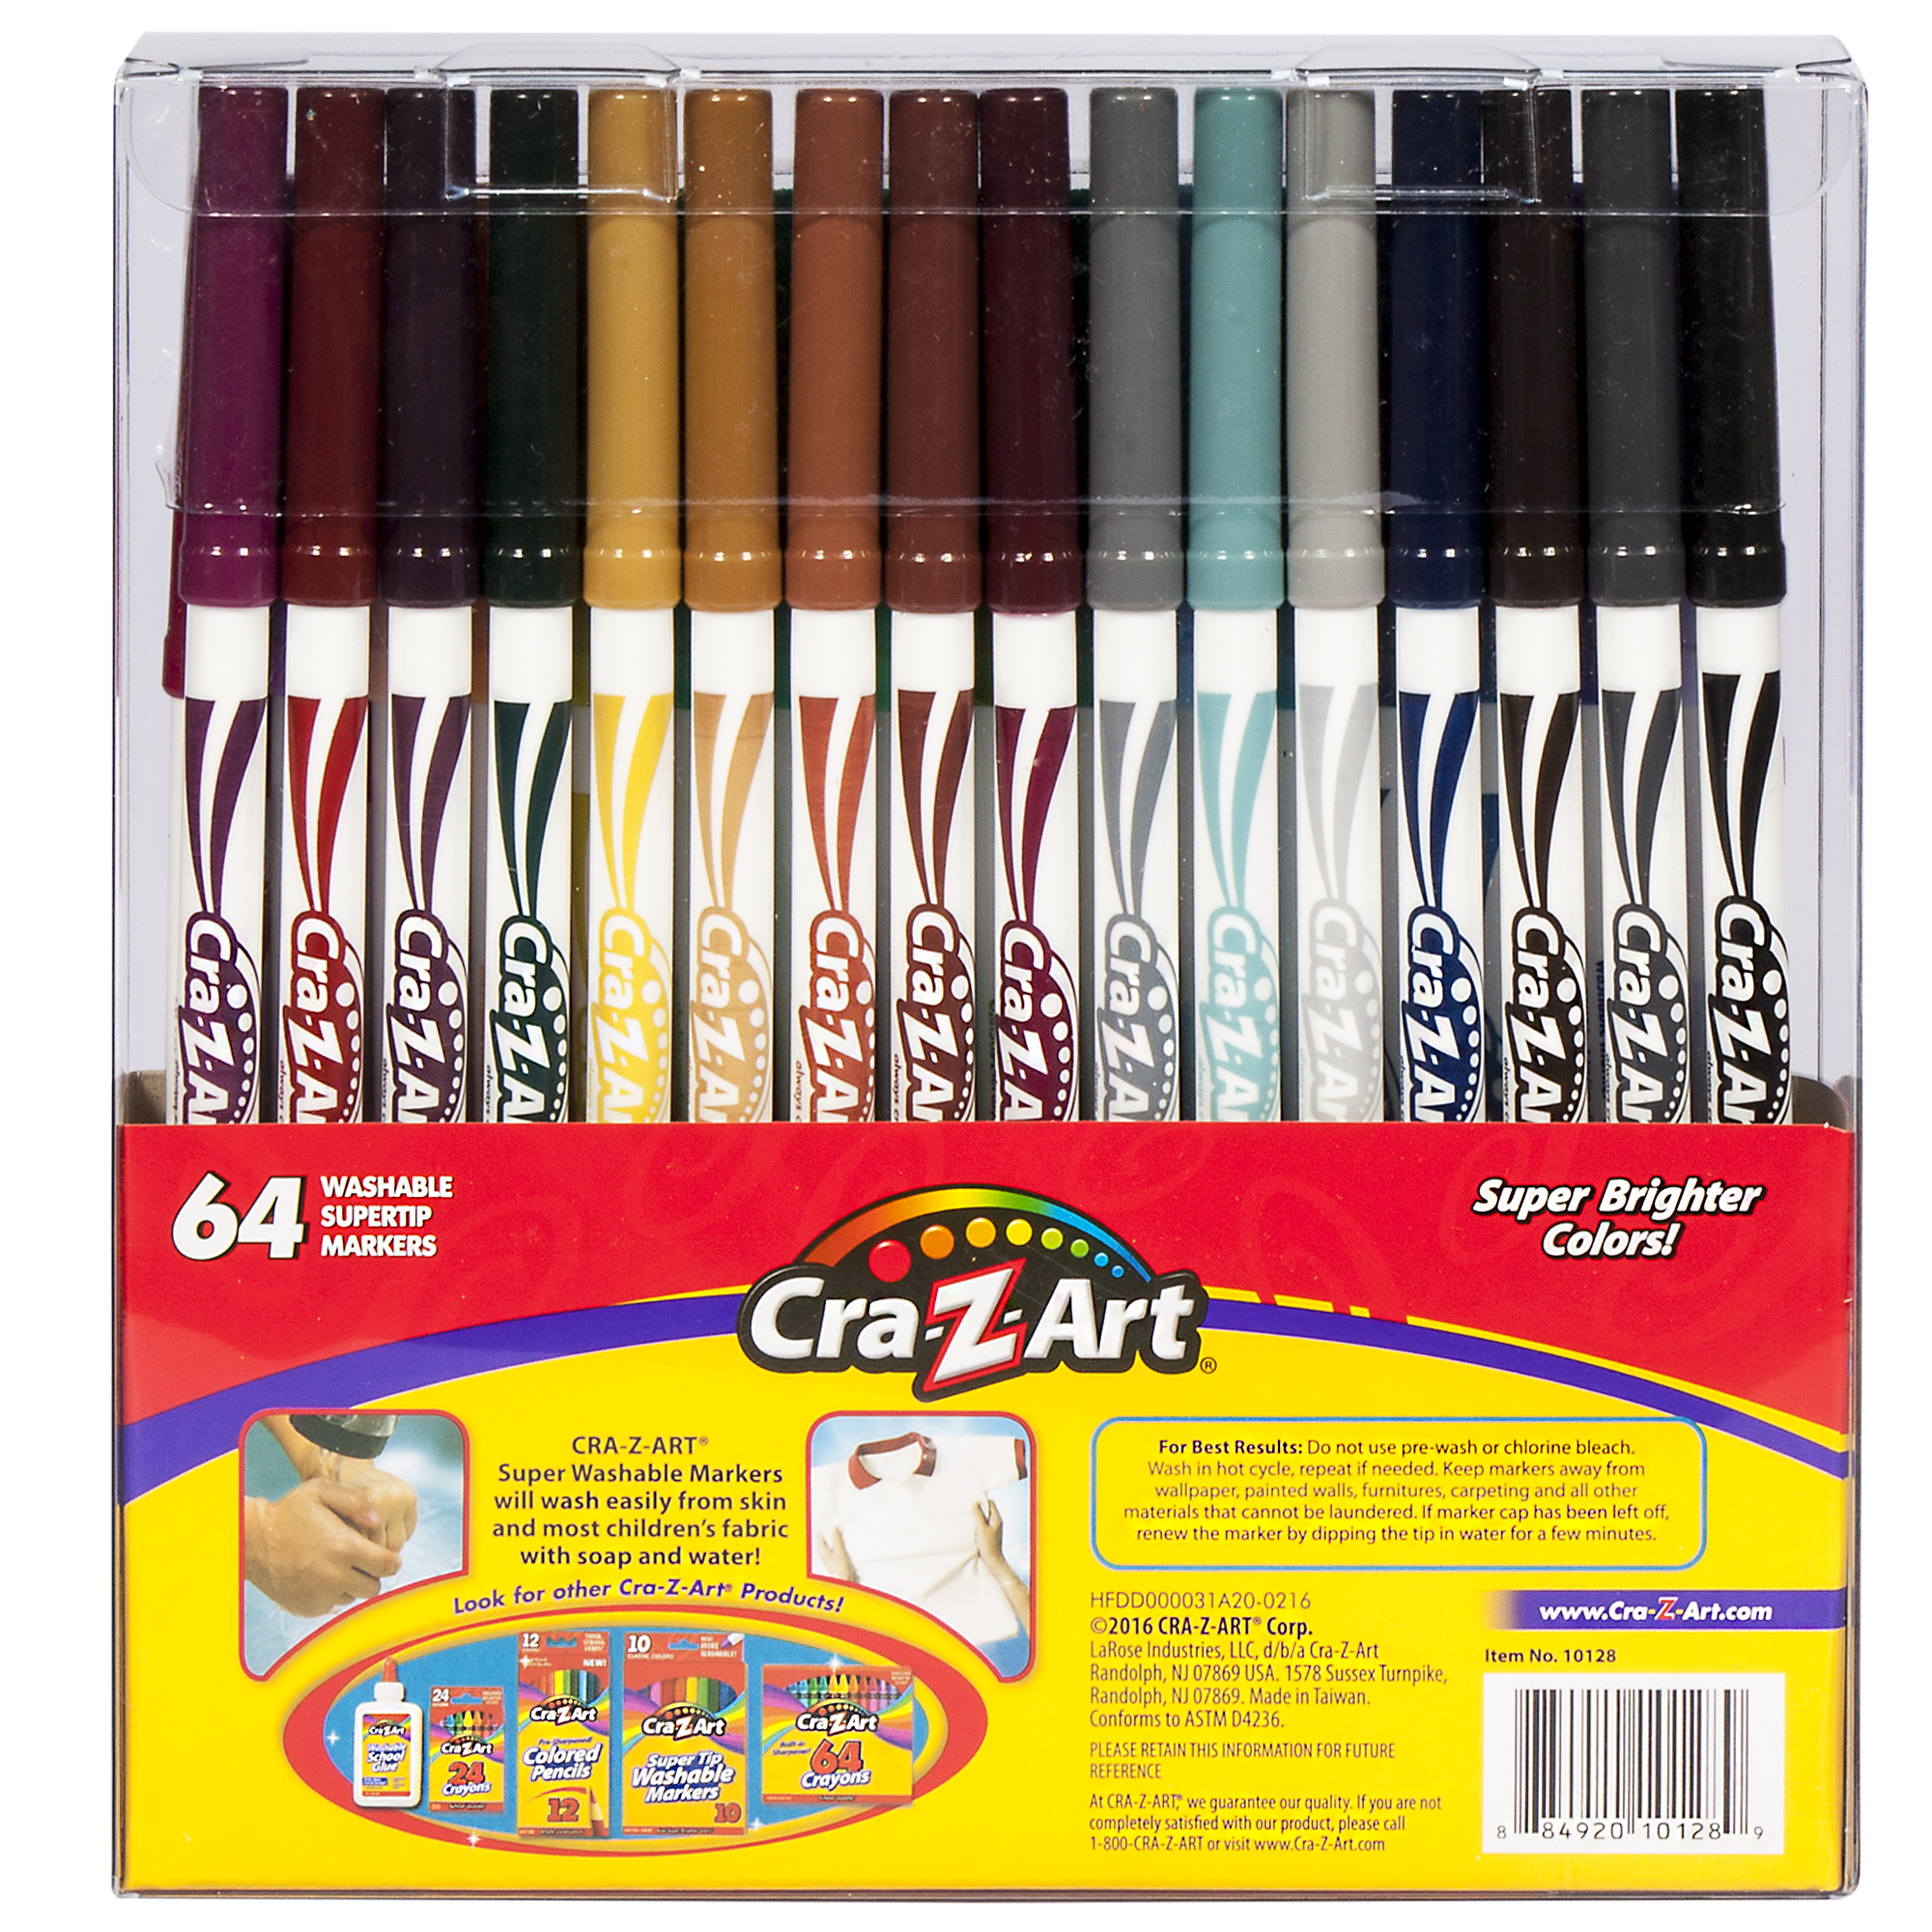 Cra-Z-Art Washable Super Tip Markers, 64 Count - image 5 of 10